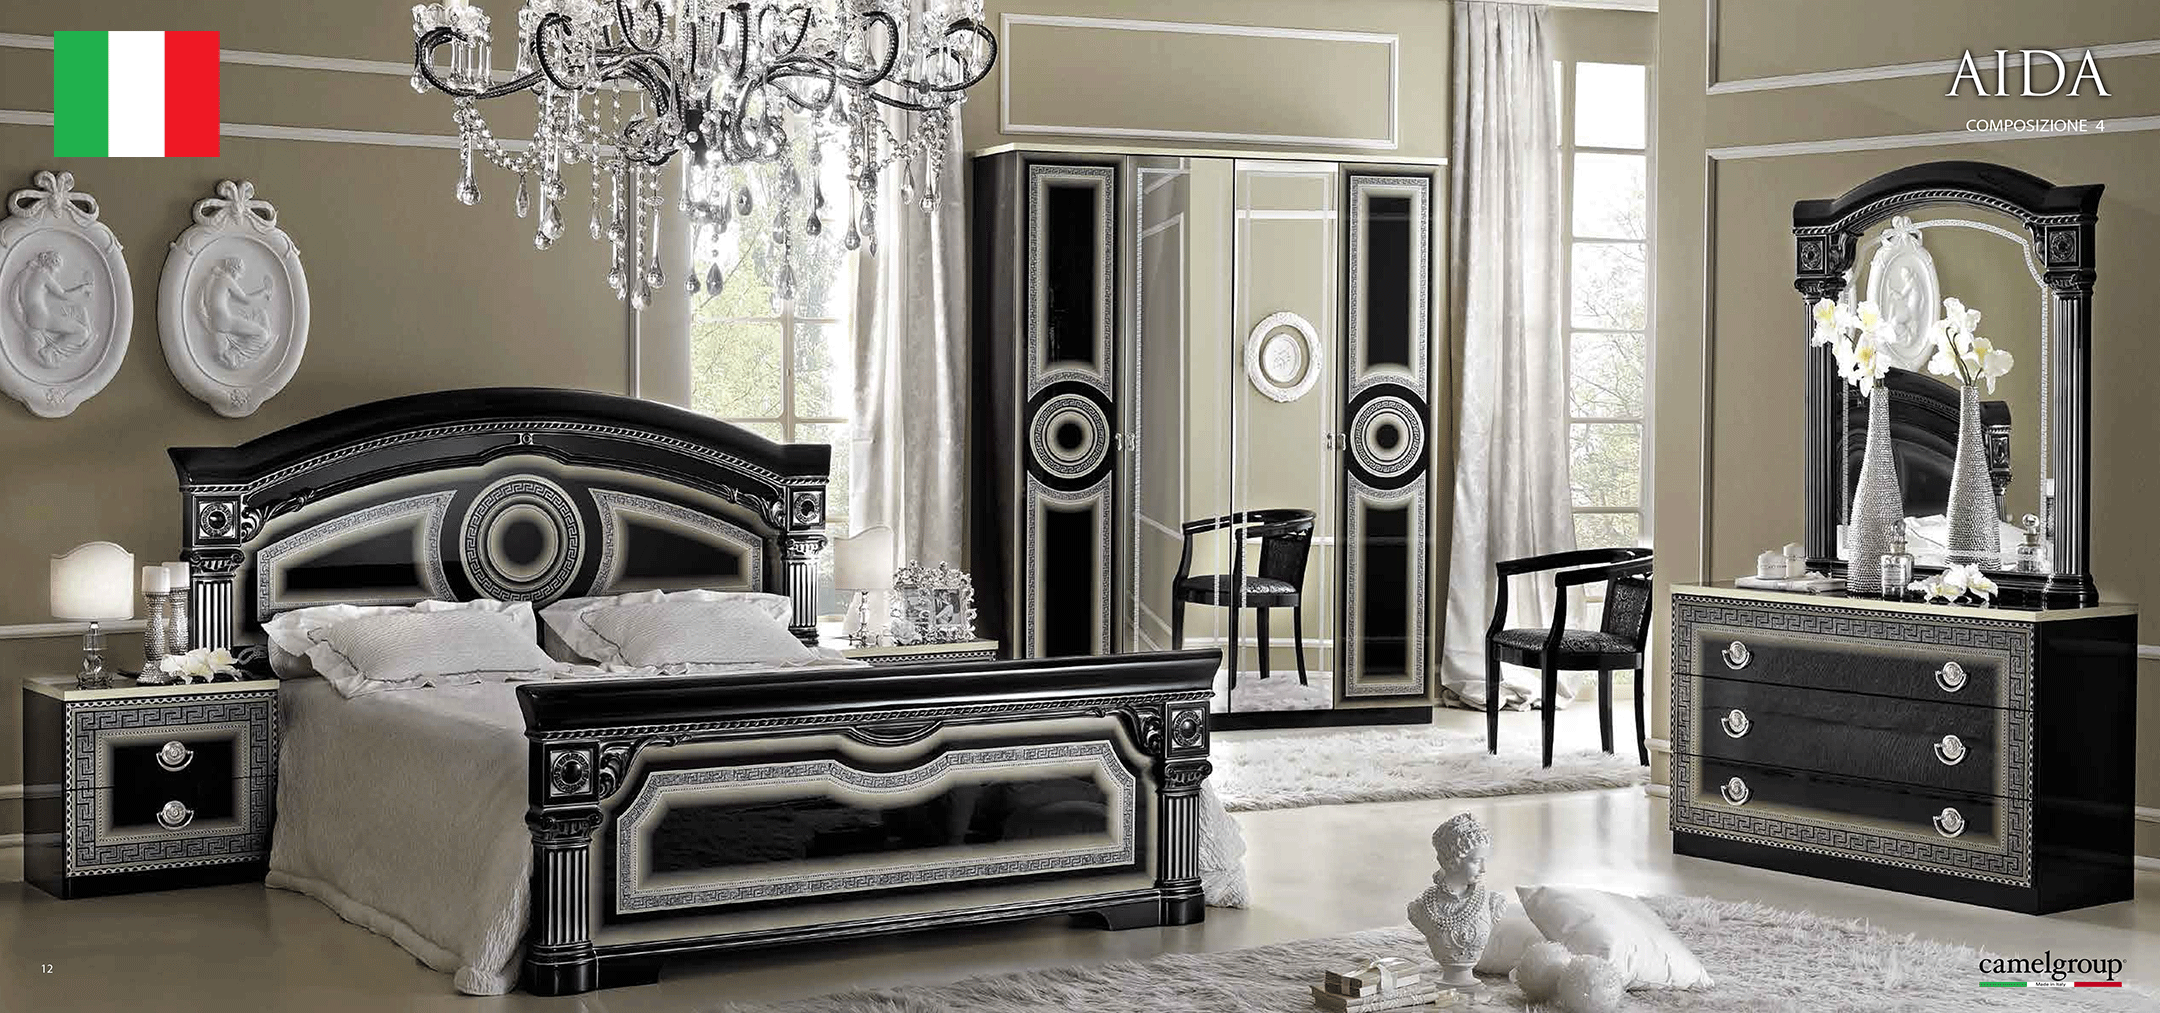 Bedroom Furniture Beds with storage Aida Bedroom Black/Silver, Camelgroup Italy